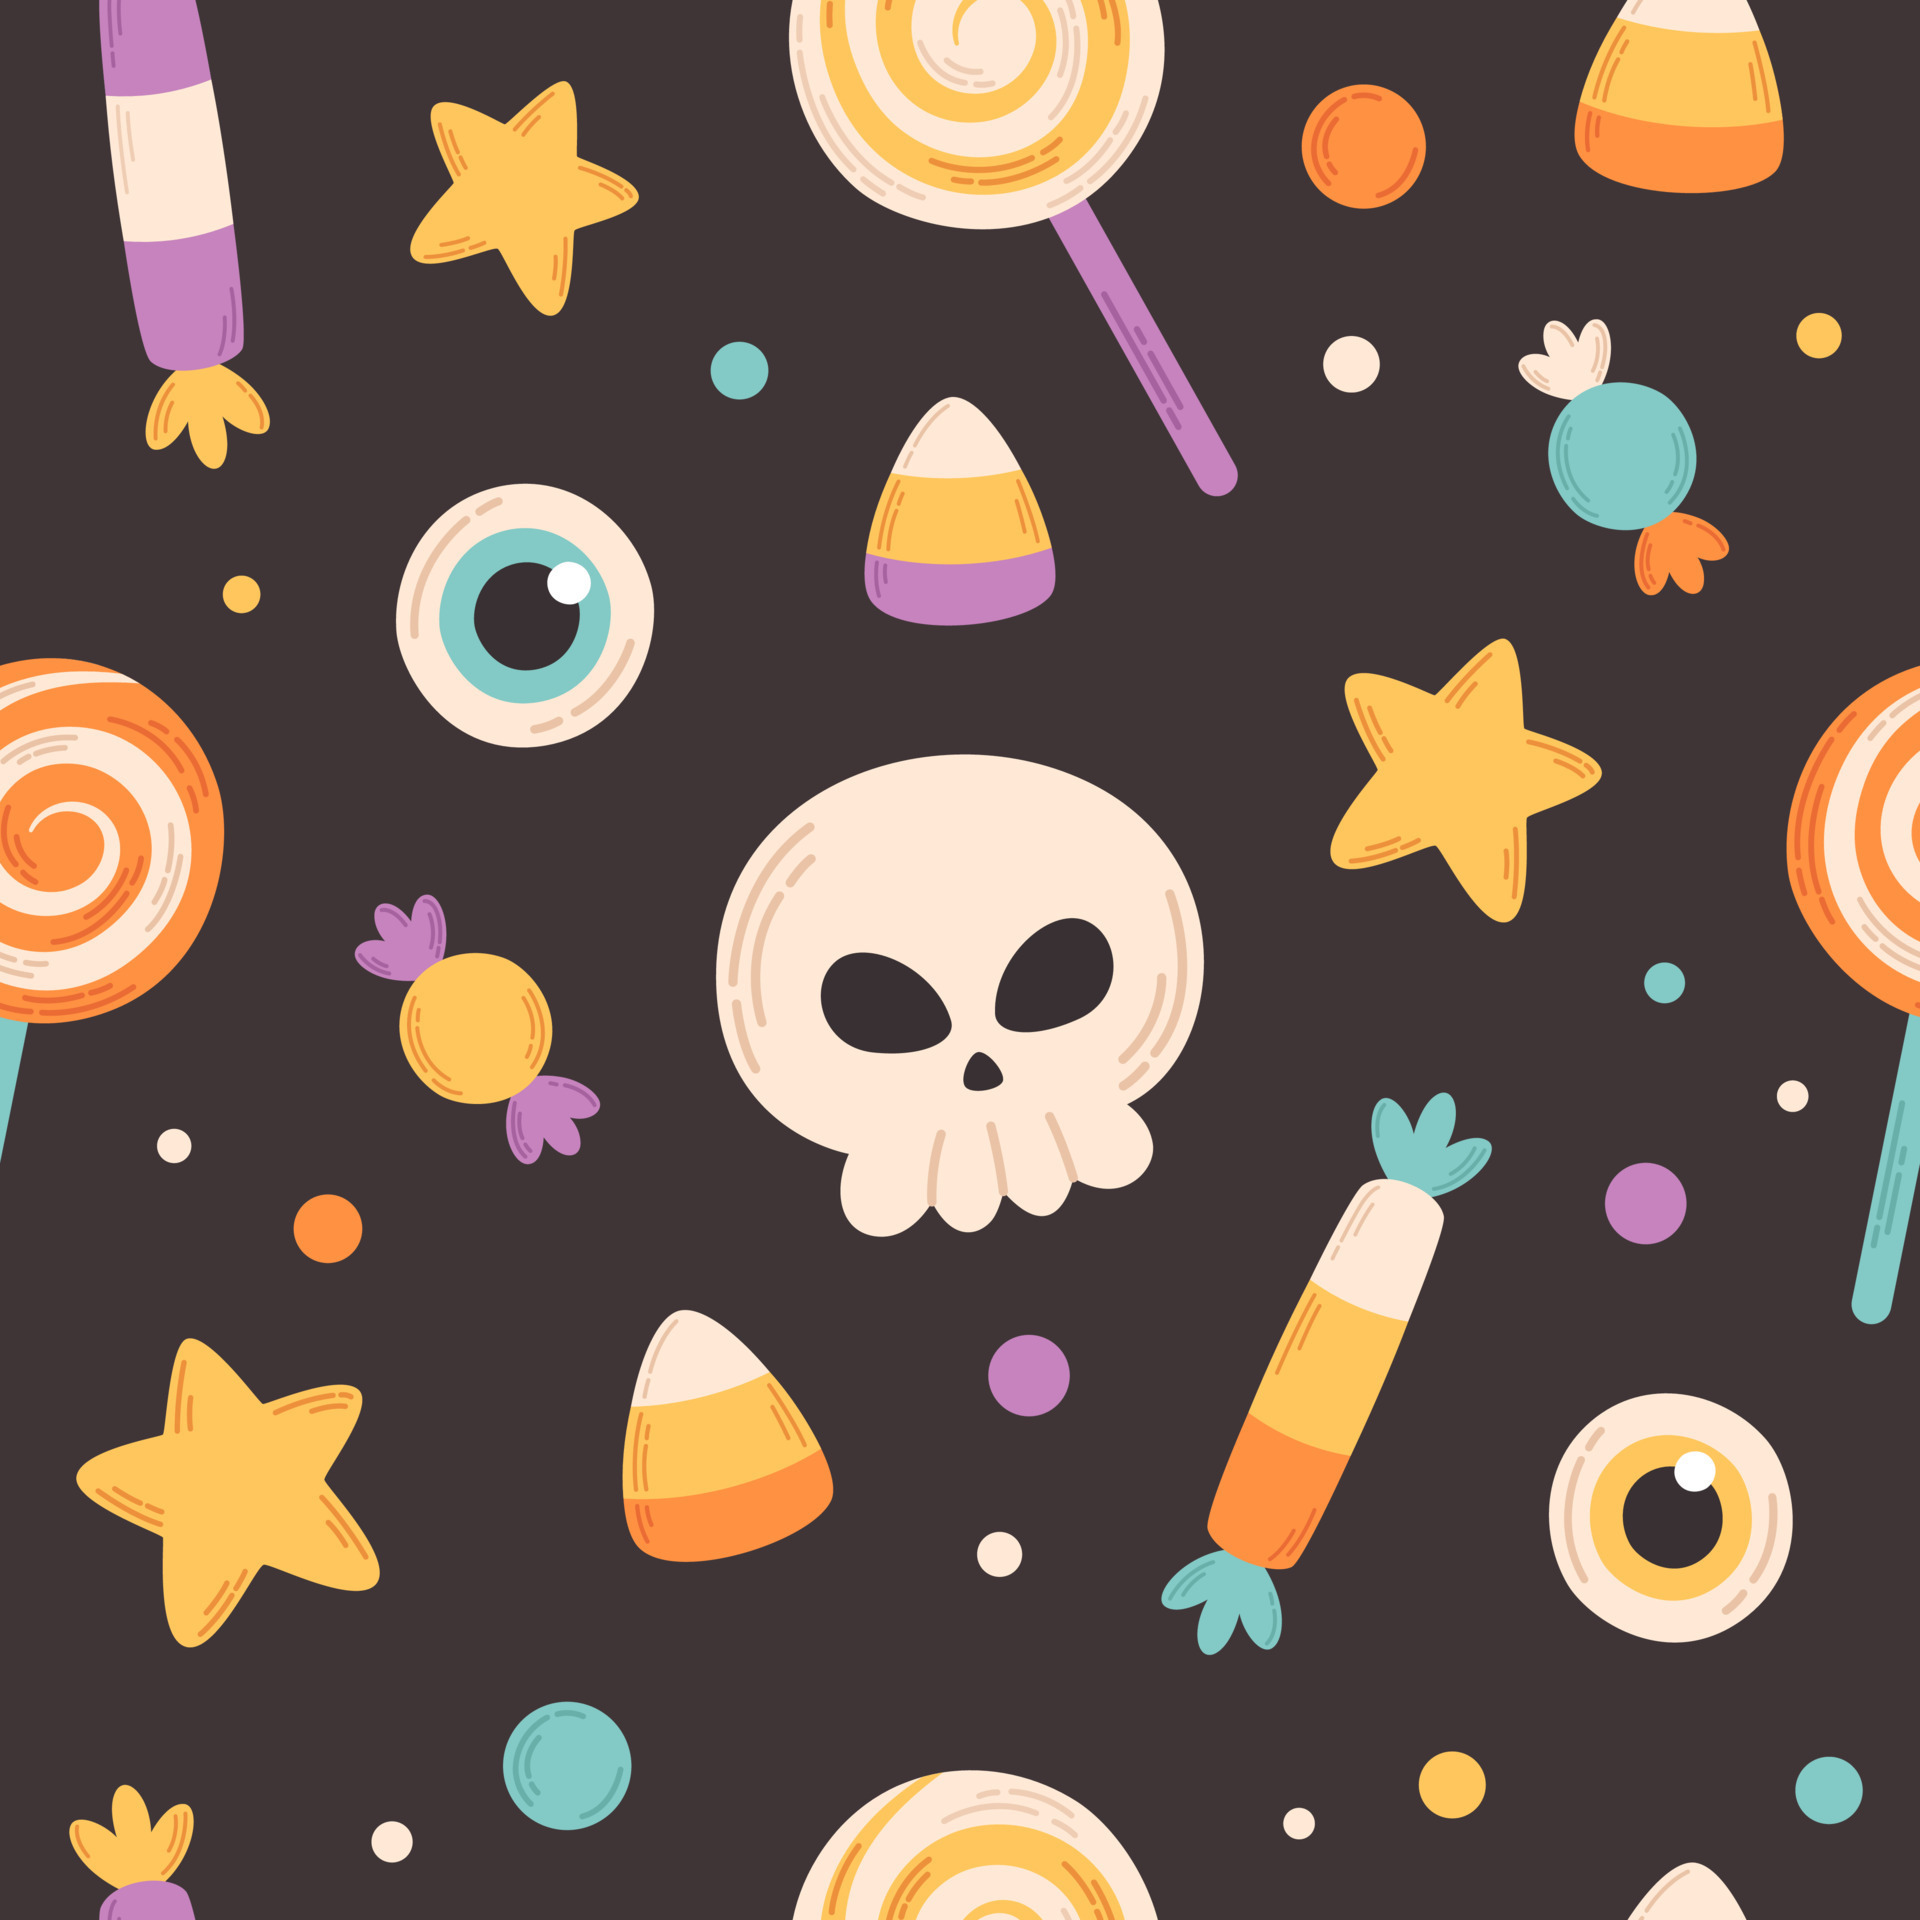 Halloween Candy Images  Free Download on Freepik